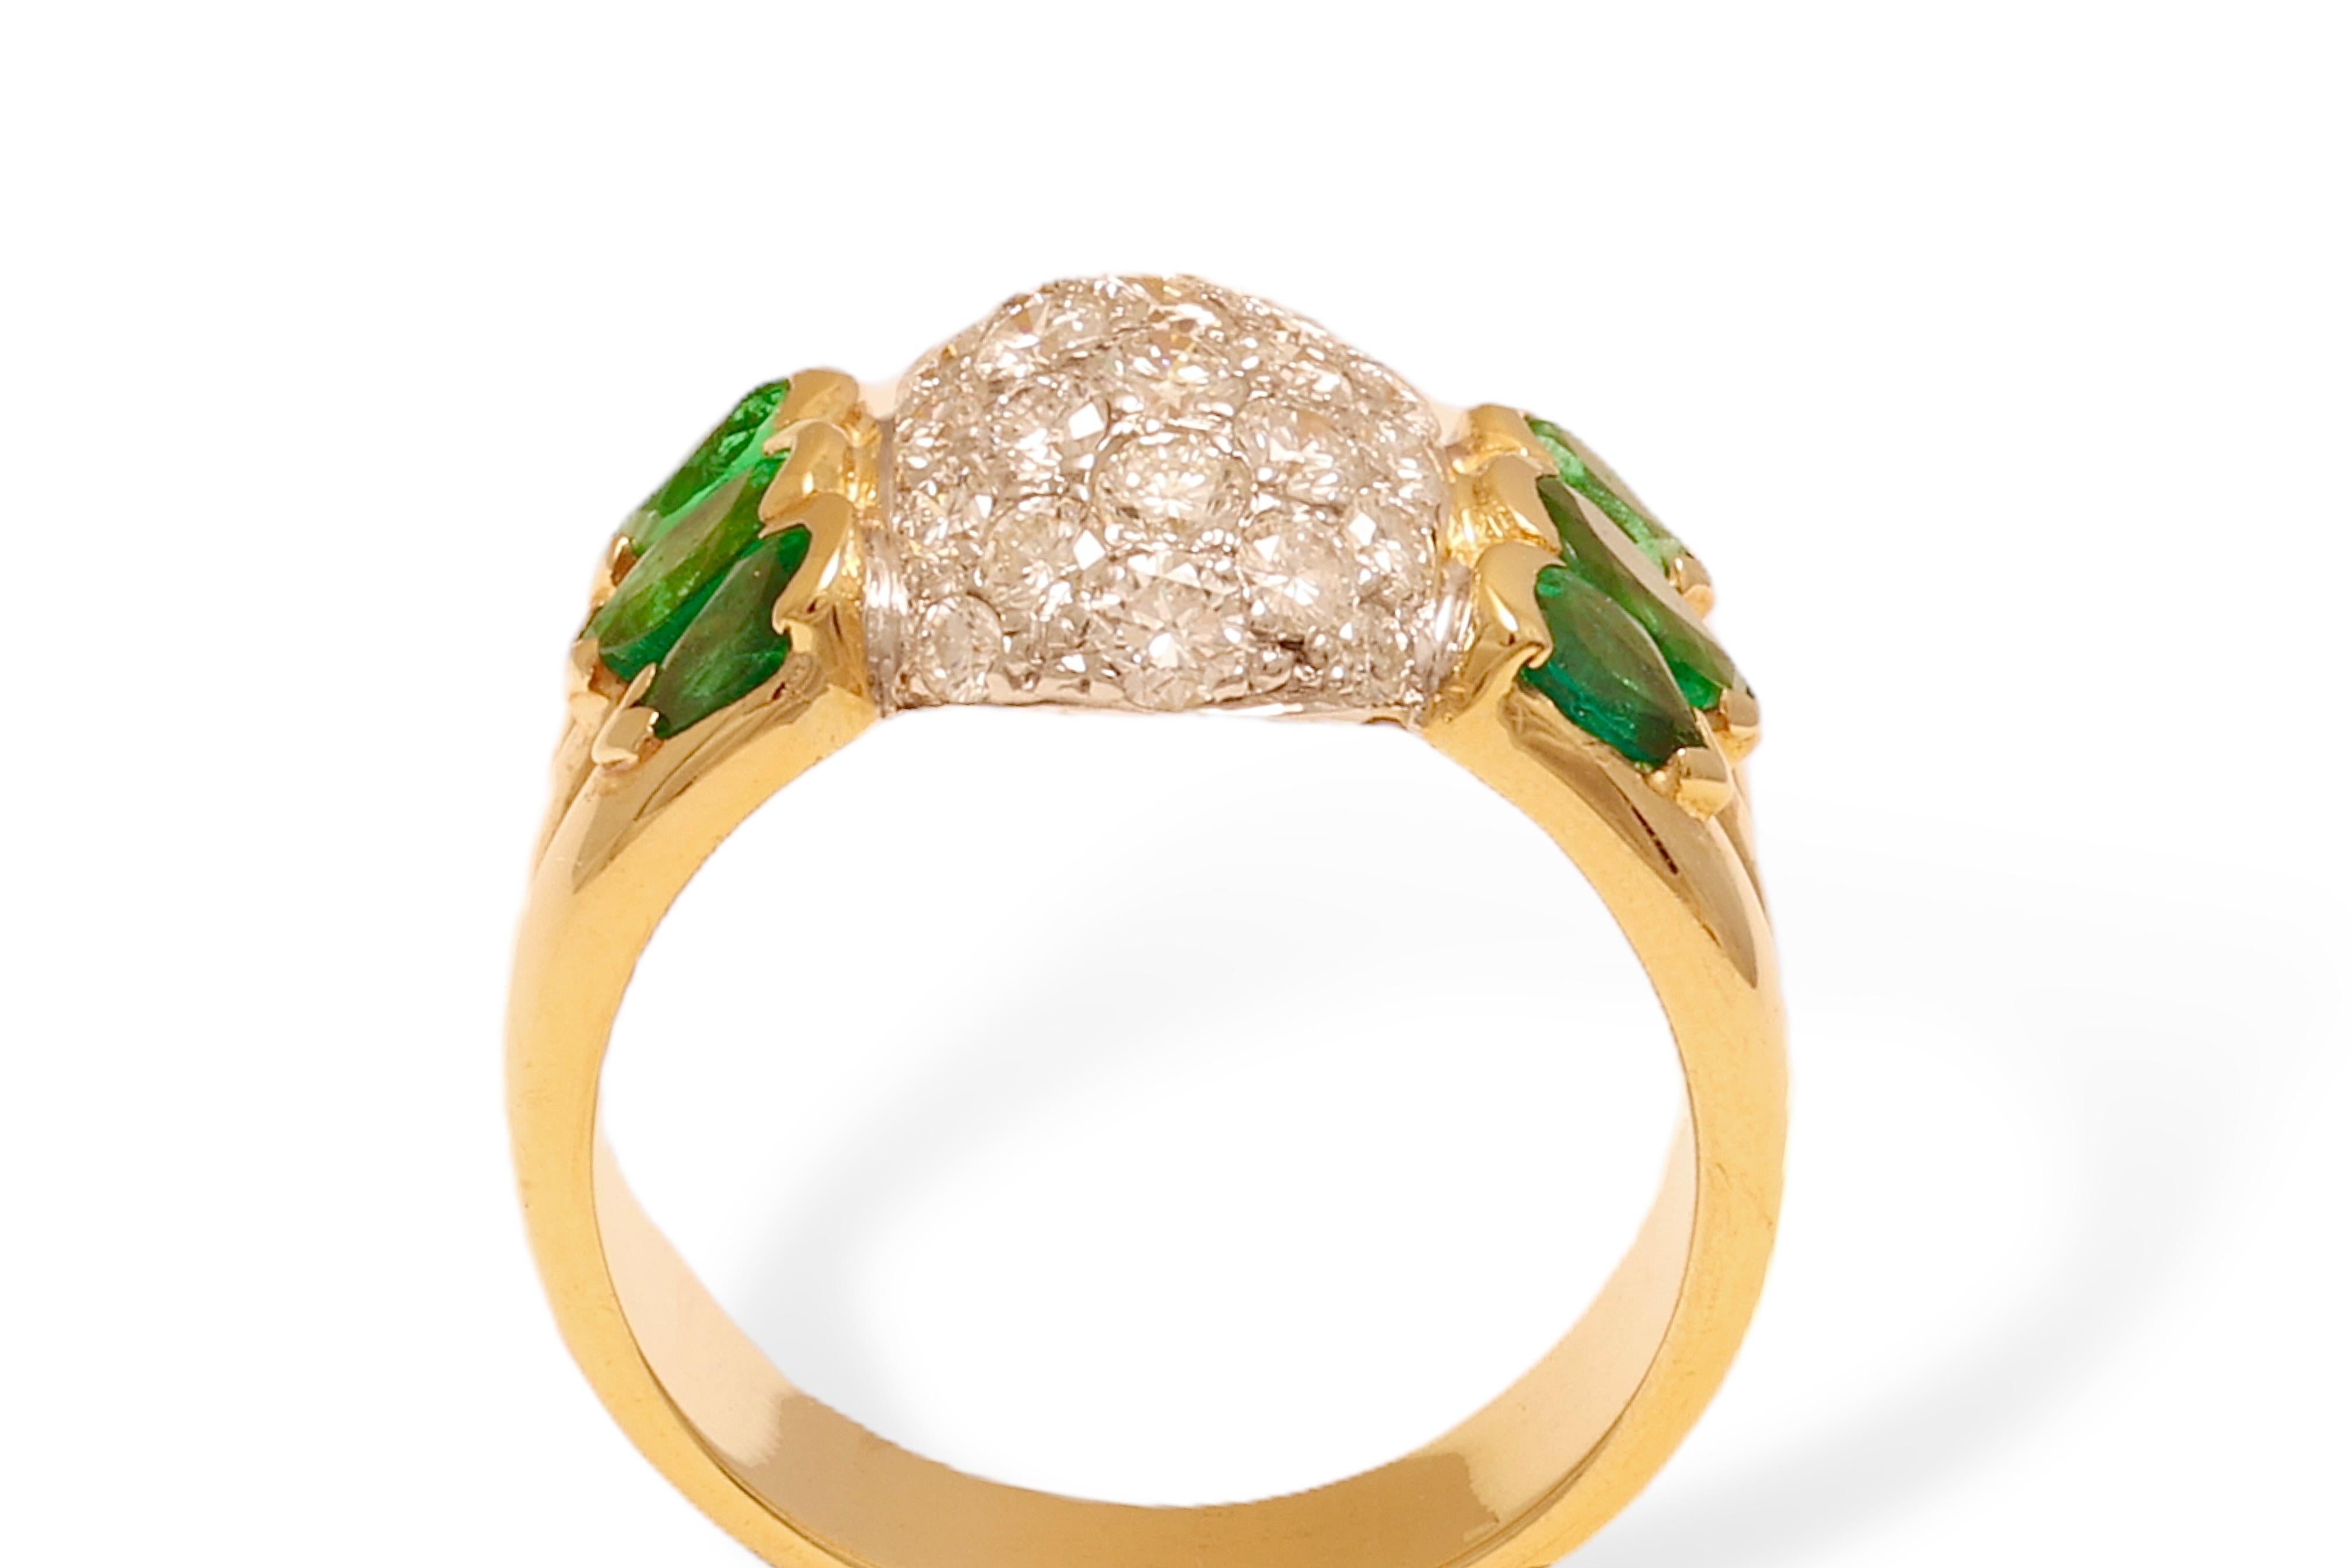 18 kt. Solid Gold Ring with 2.36 ct. Diamonds and 2 ct. Emerald For Sale 2